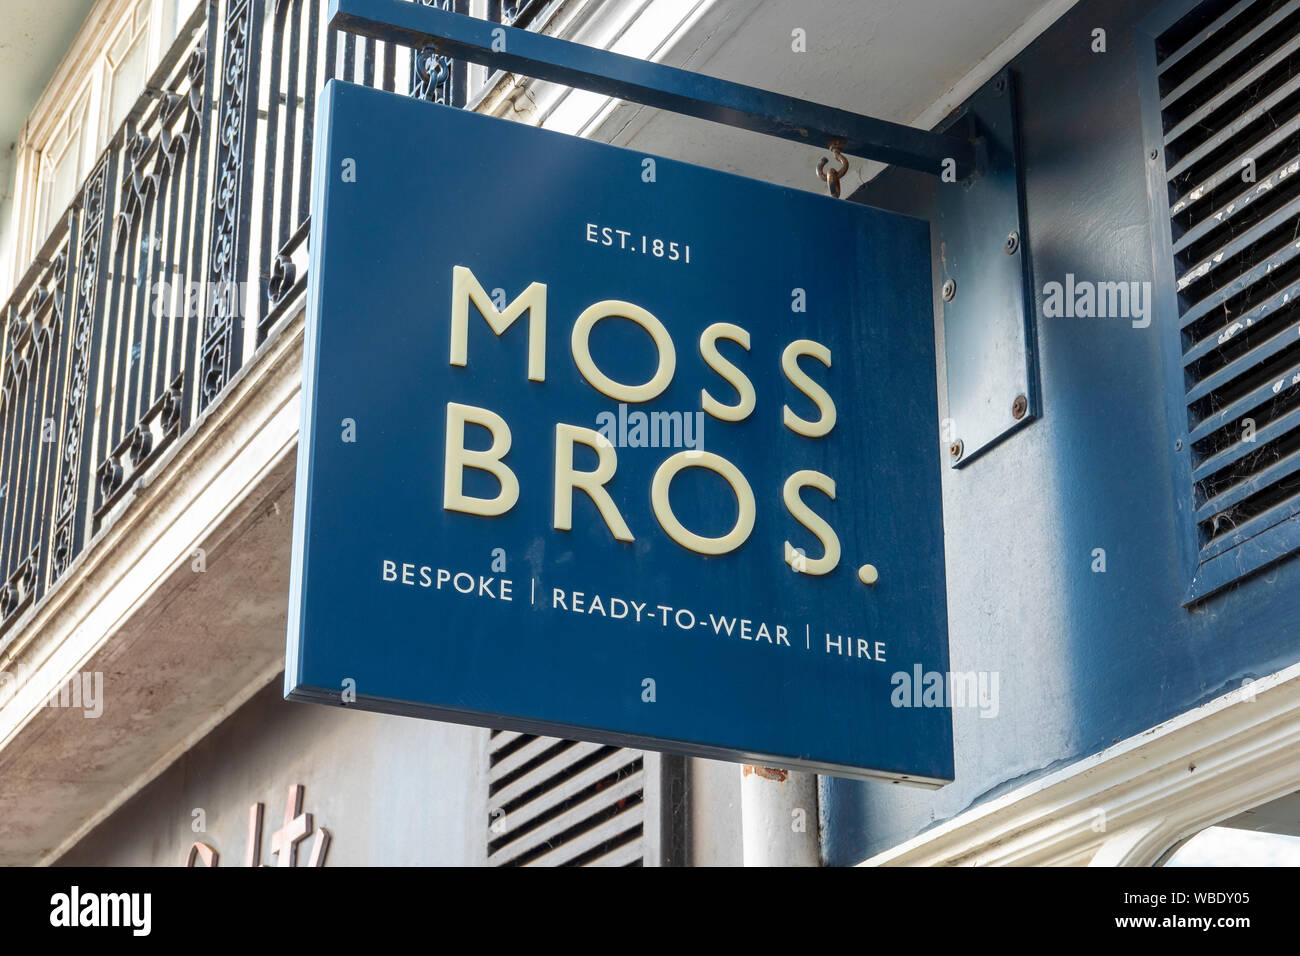 Moss Bros. tailoring and clothes hire business sign Stock Photo